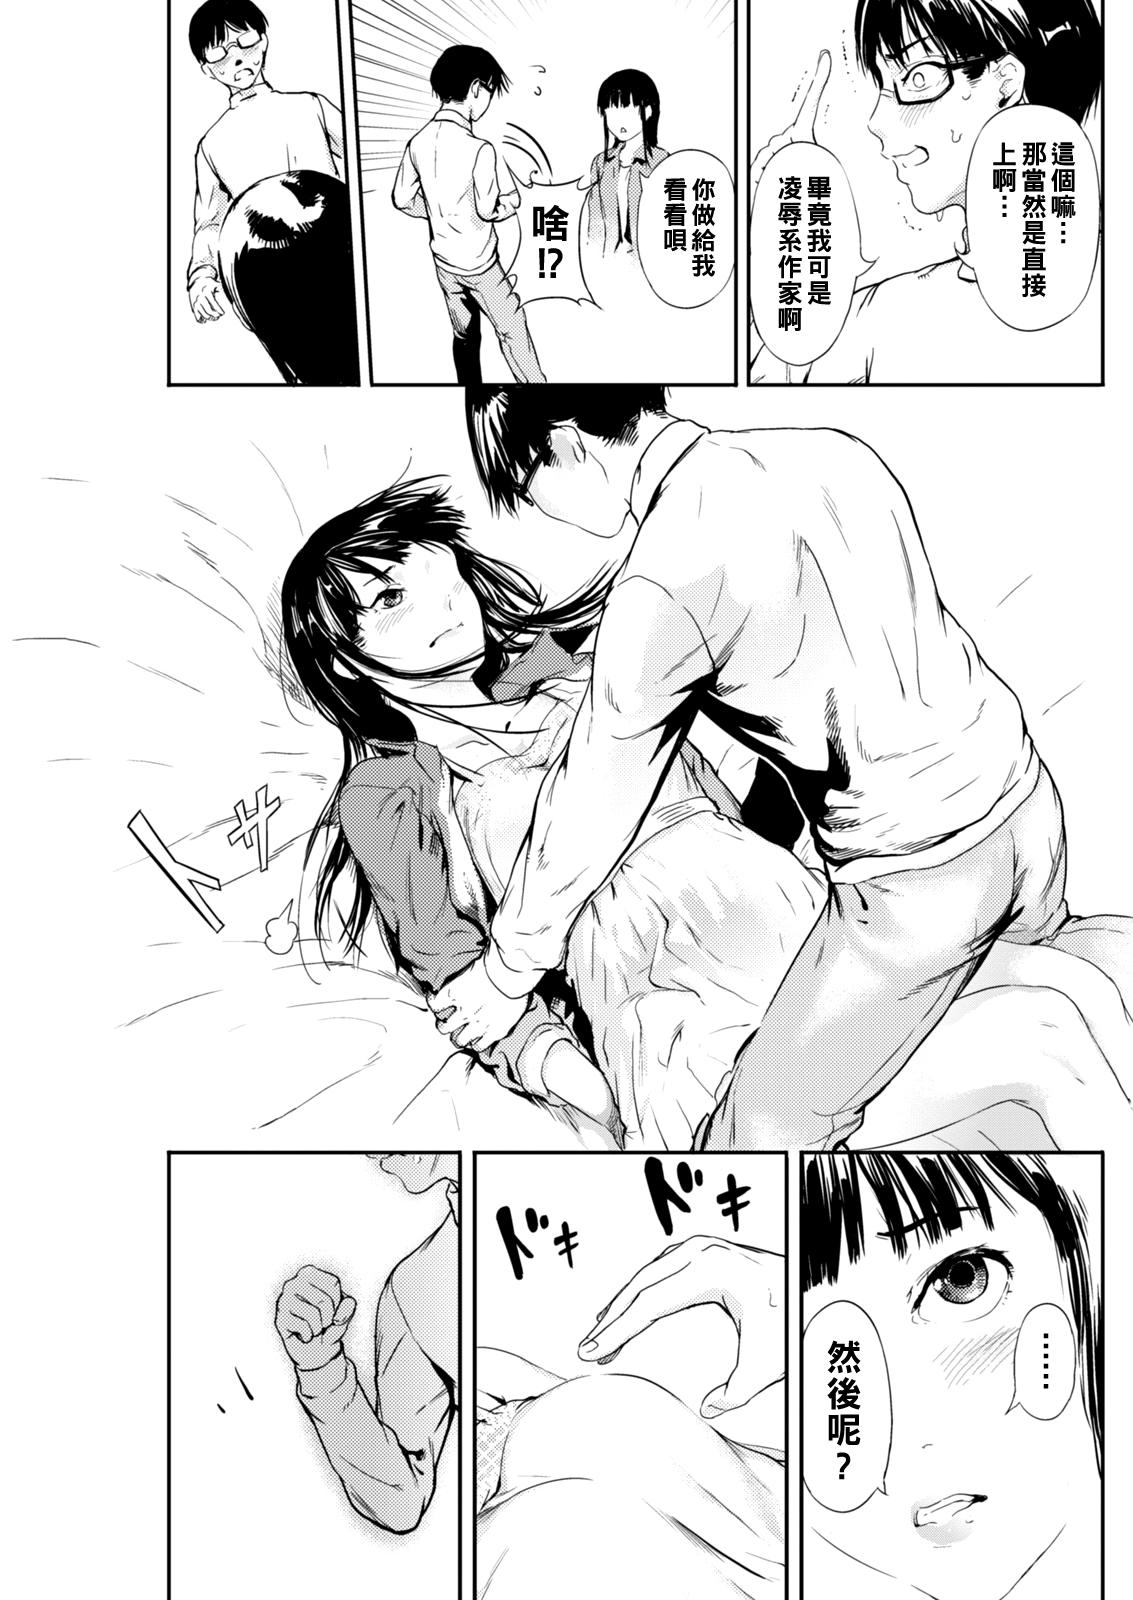 Anal Play 漫画ガール（Chinese） Tanned - Page 11